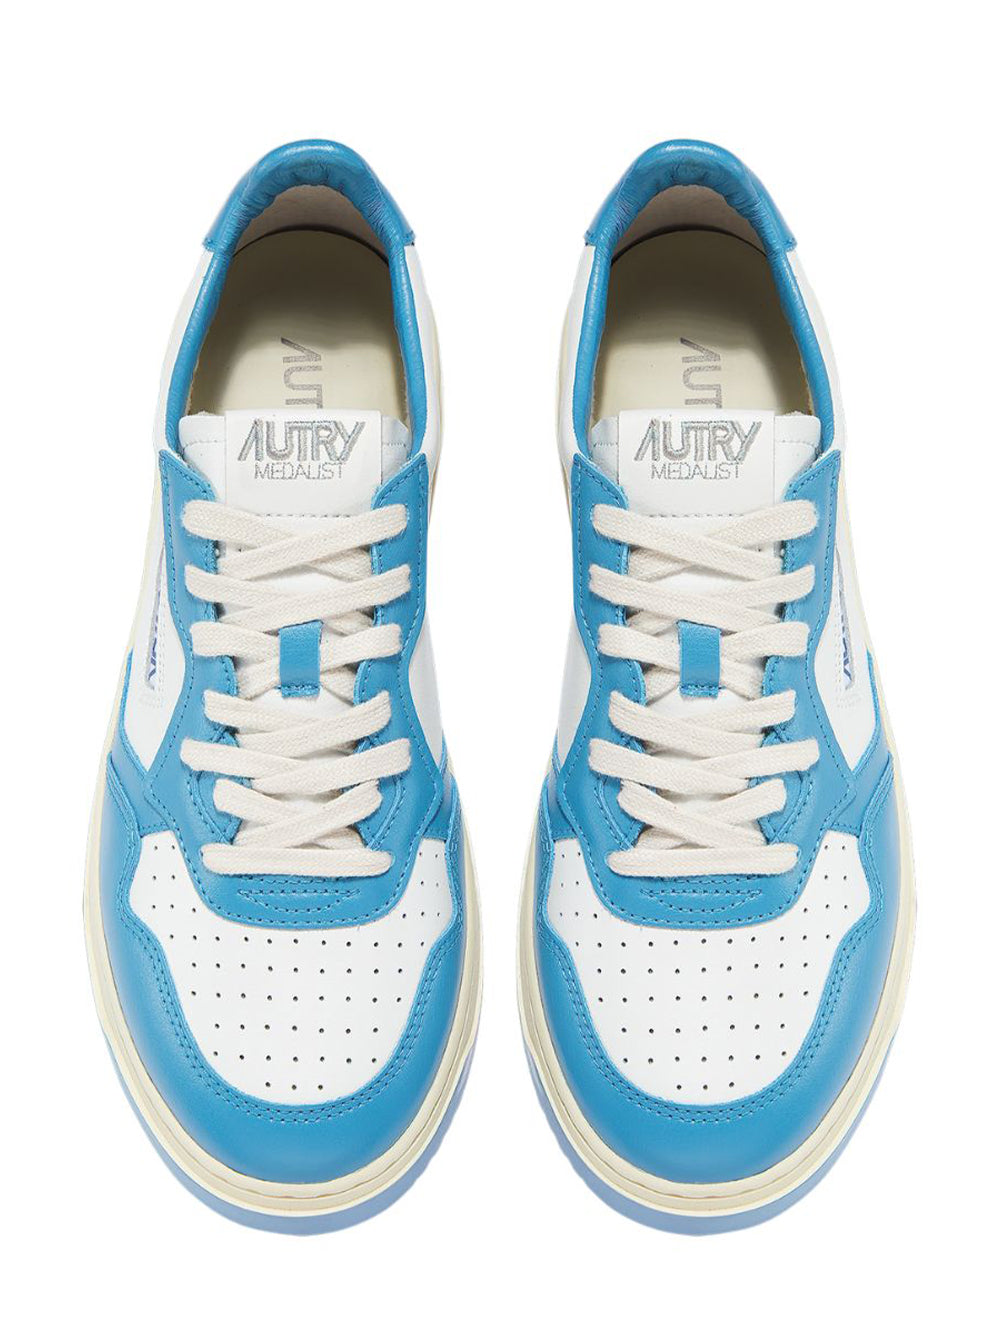 Medalist Low Sneakers In Two-Tone Leather Color (White And Azure) (Men)